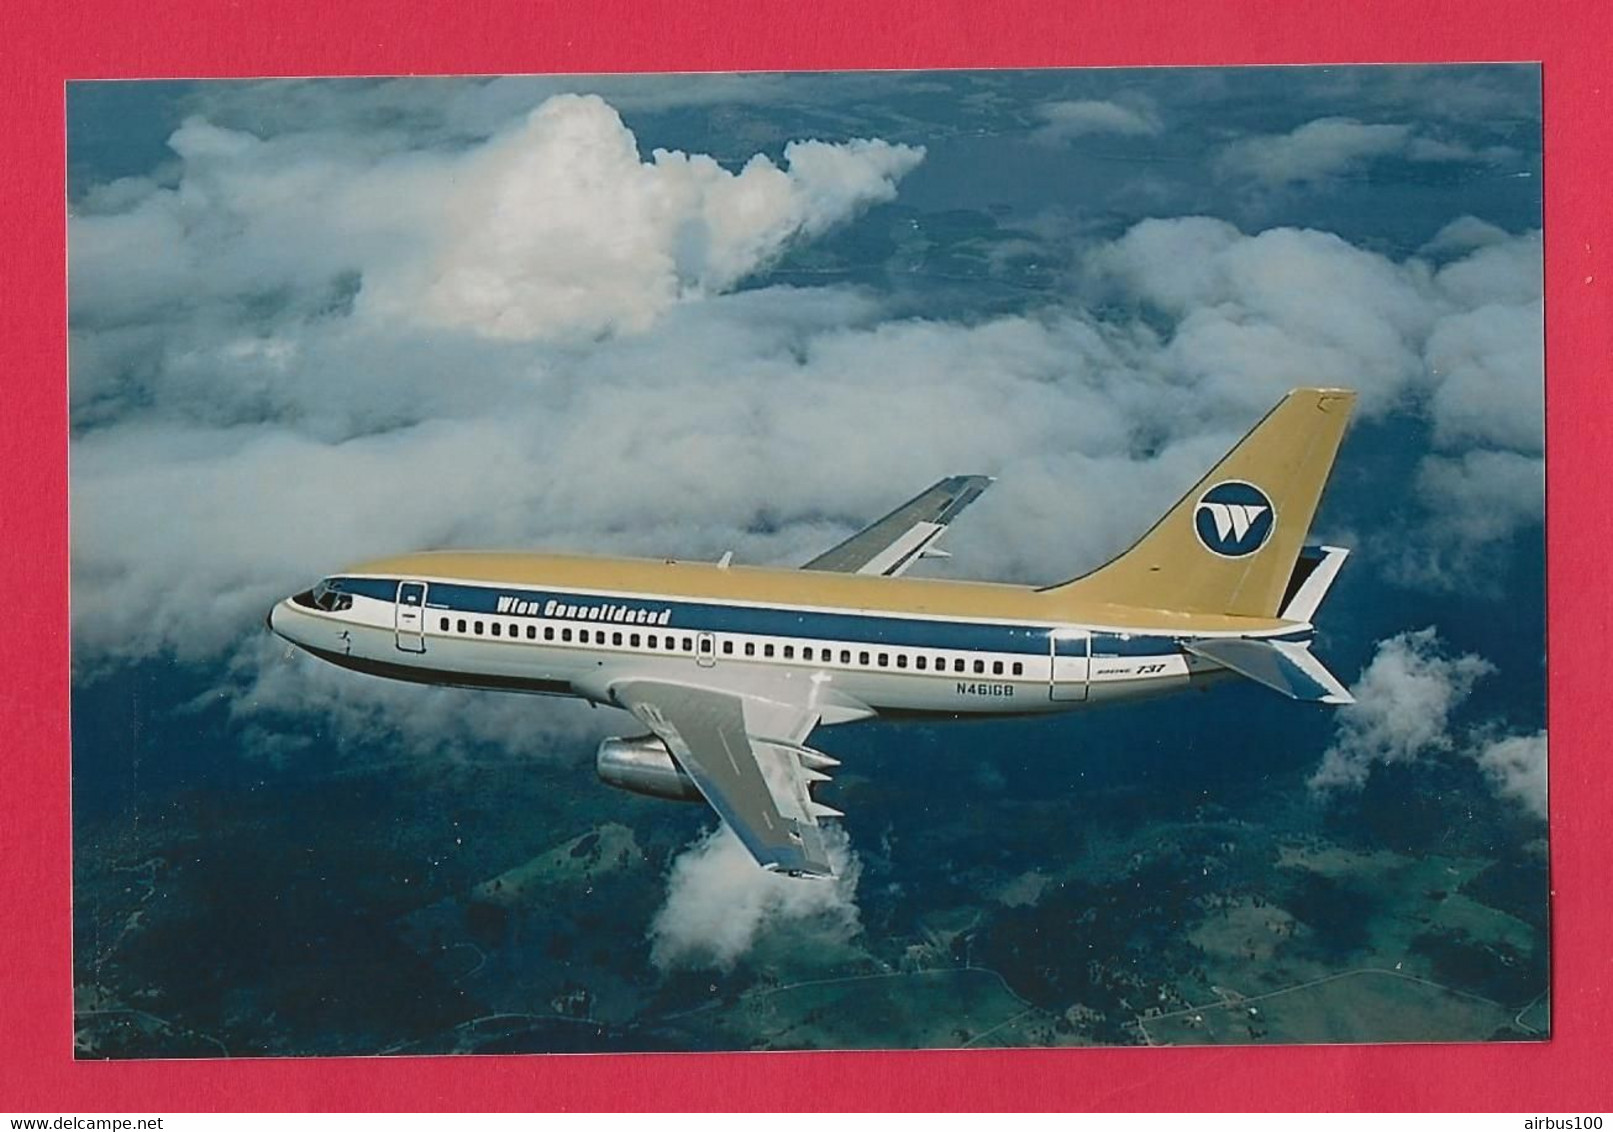 BELLE PHOTO REPRODUCTION AVION PLANE FLUGZEUG - BOEING 737 WIEN CONSOLIDATED - Aviación